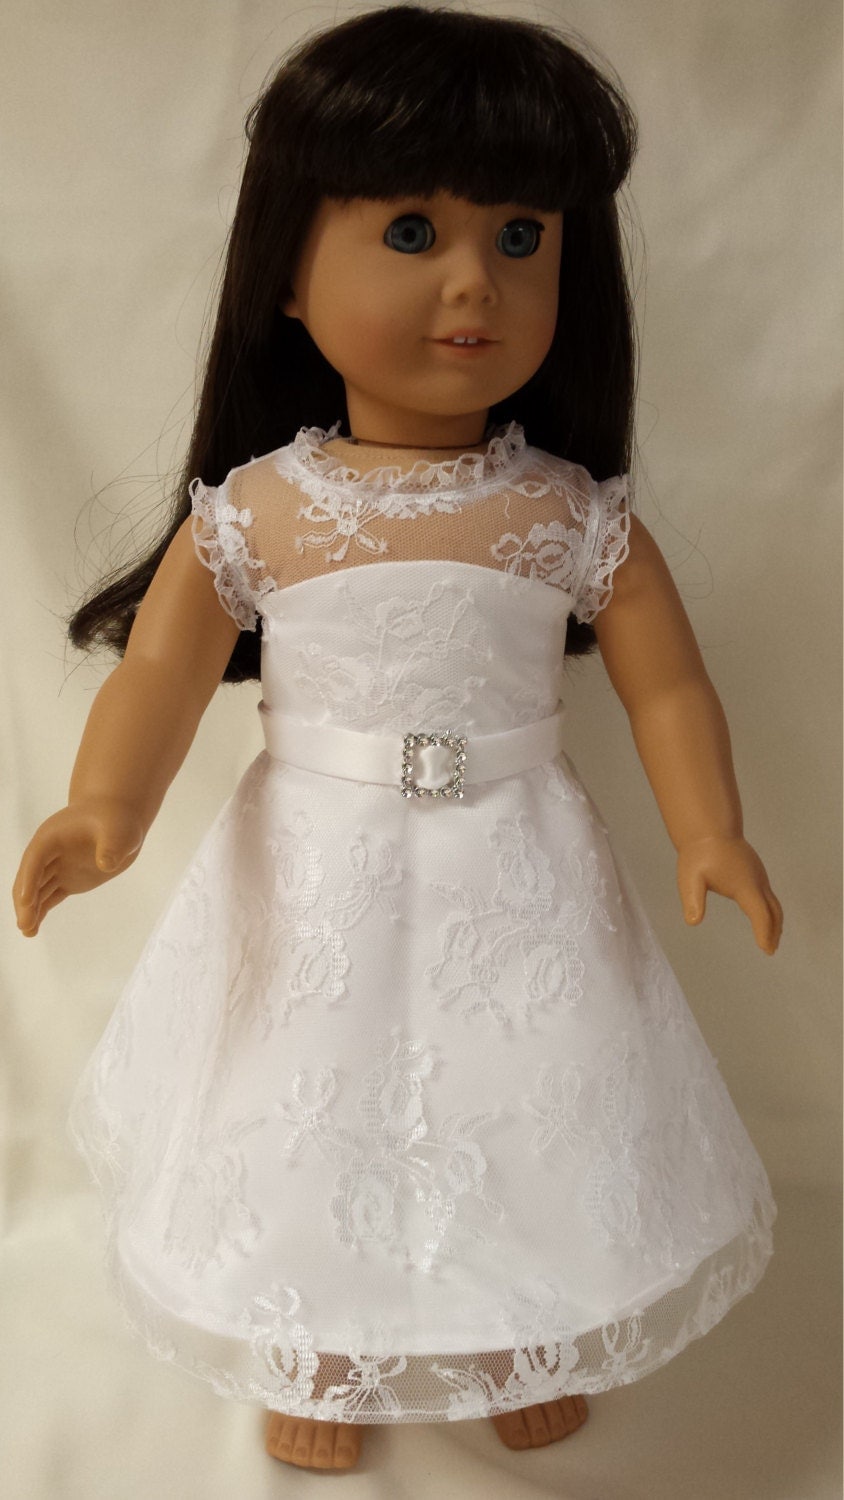 Lace Wedding Dress for 18 doll